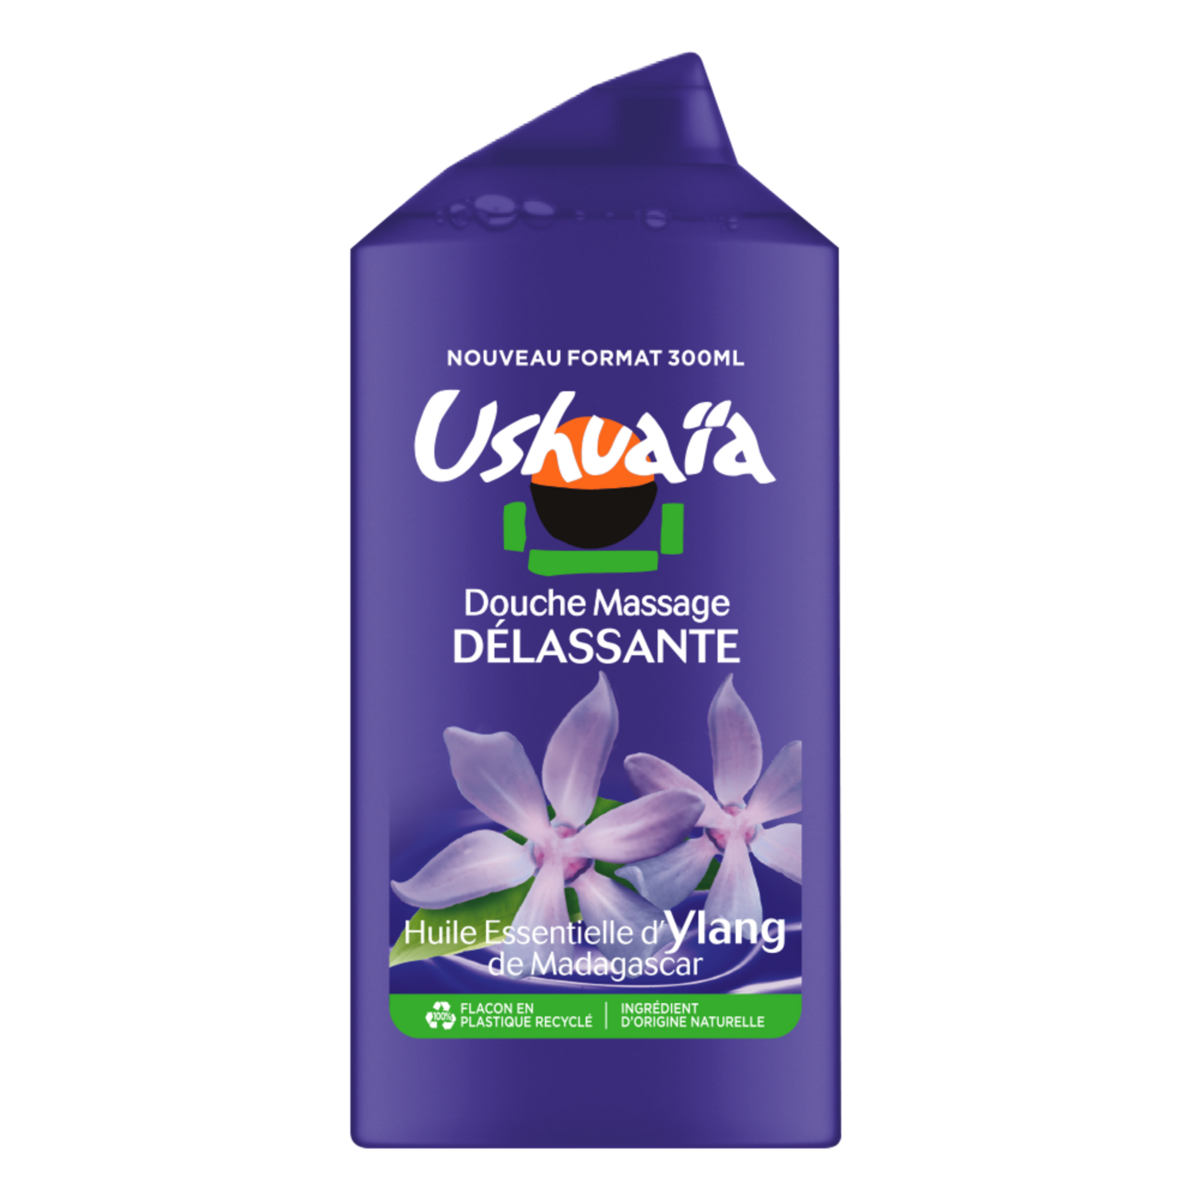 USHUAIA Shower gel Relaxing massage essential oil of Ylang from Madagascar 300ml